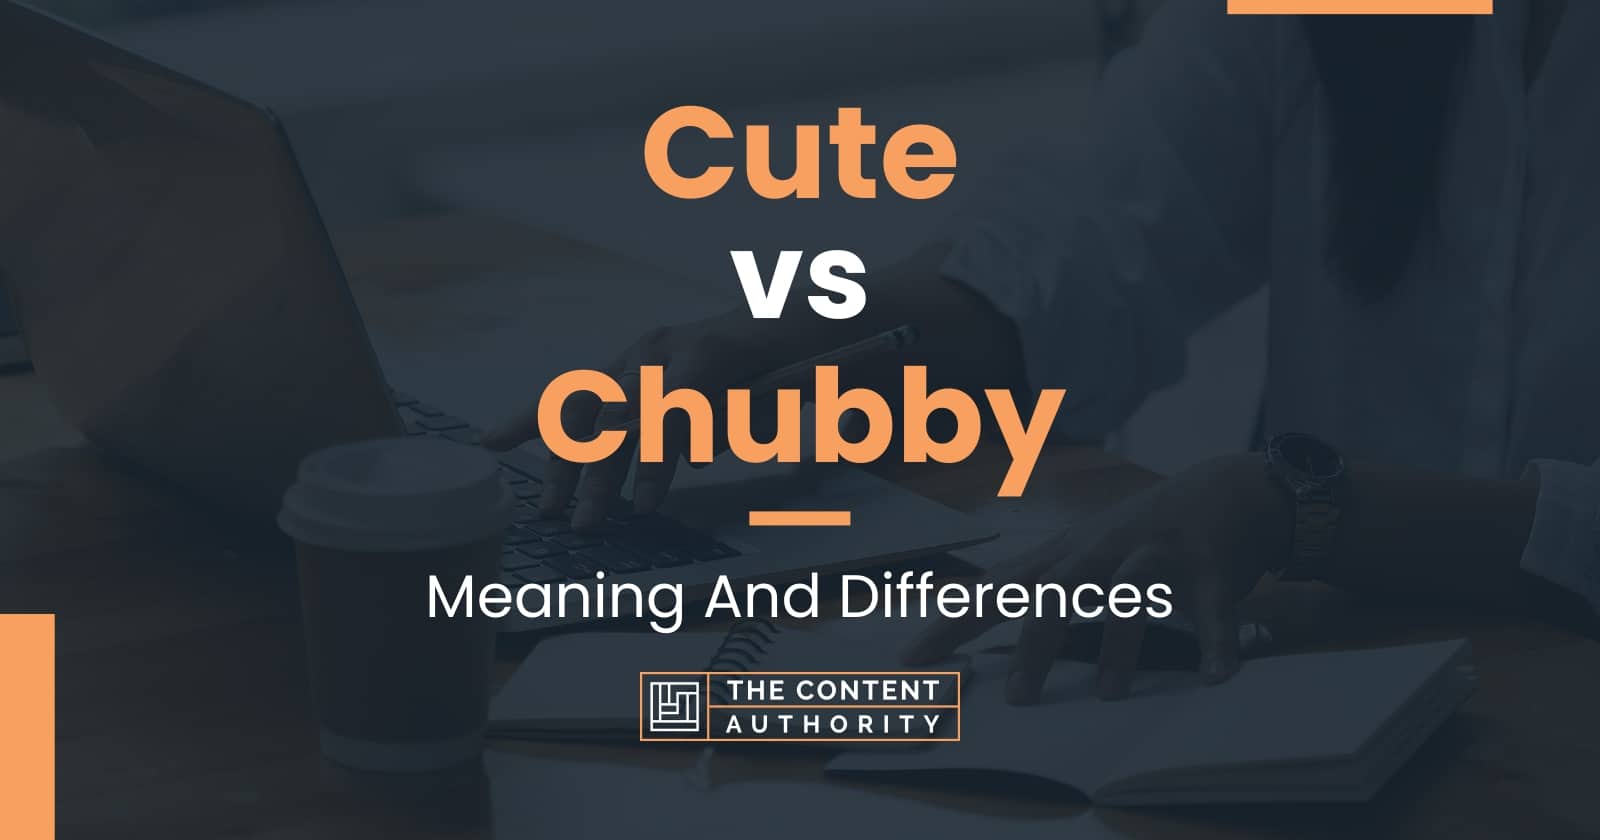 Cute vs Chubby Meaning And Differences